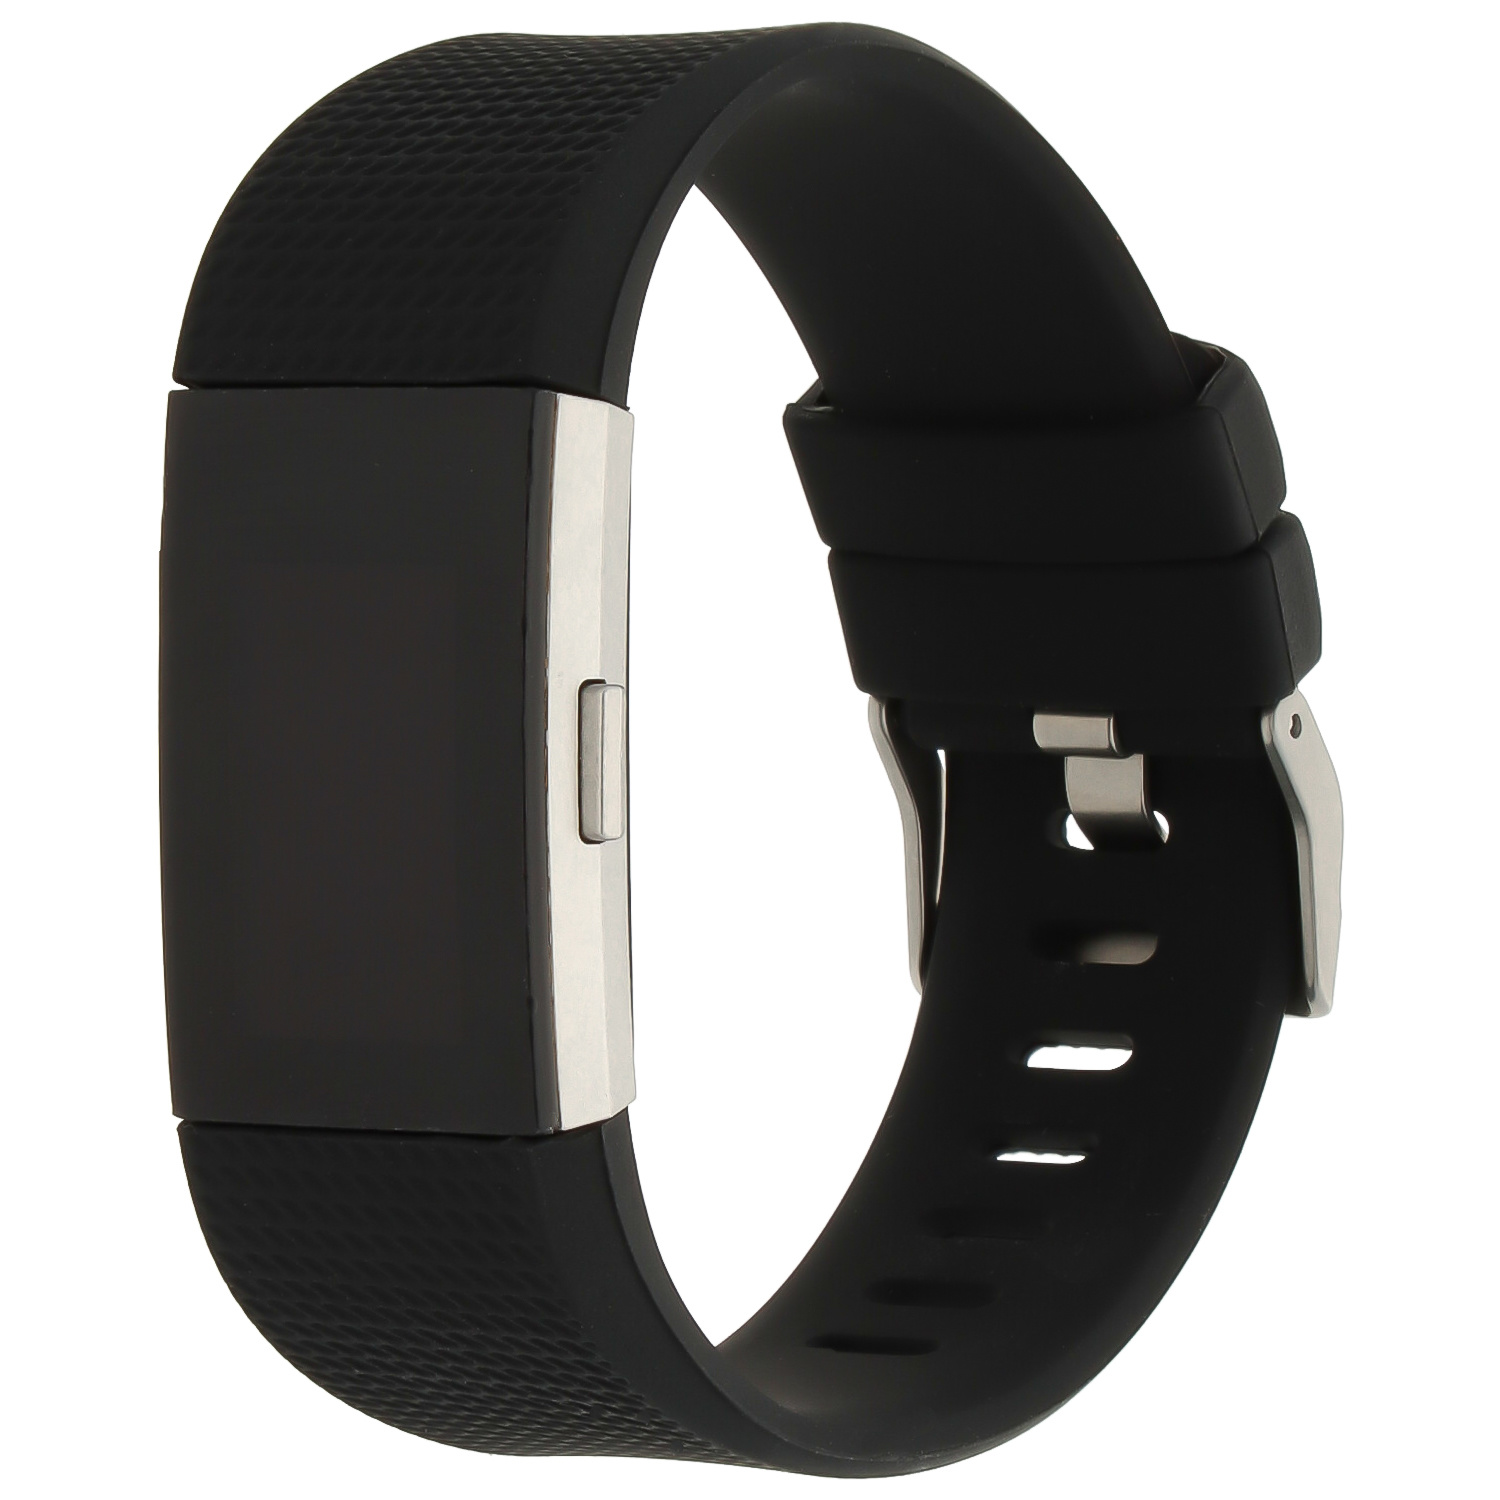 Goedkope Fitbit charge 2 band - zwart - 123watches B.V.